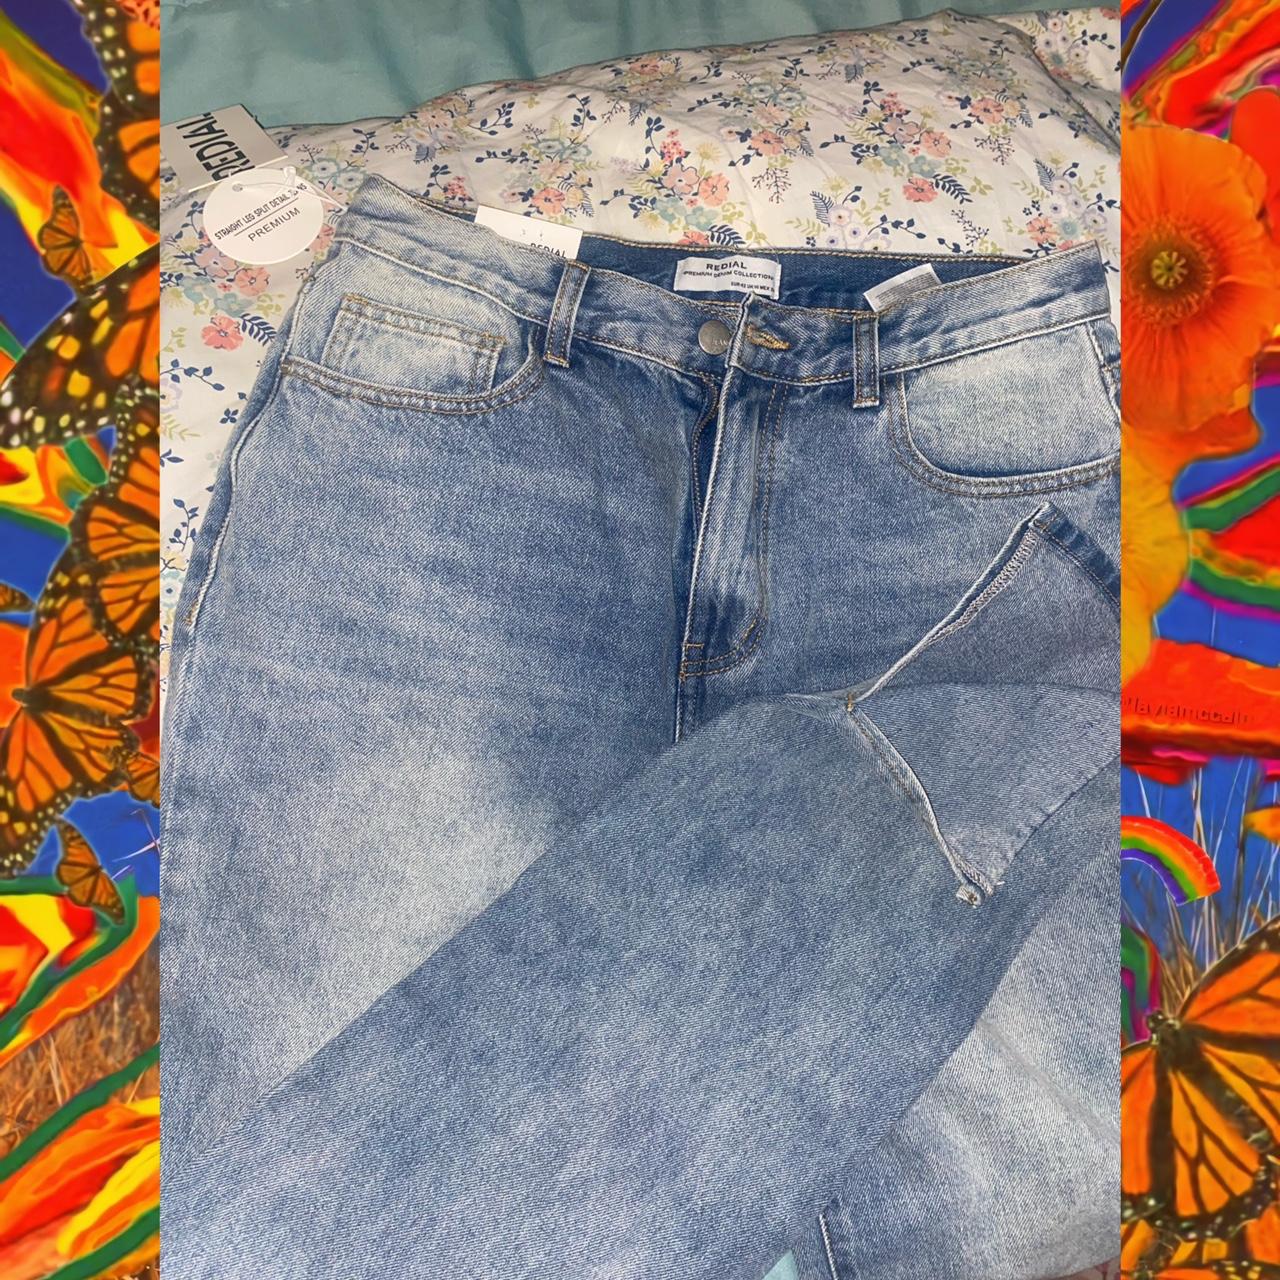 Abercrombie & Fitch Women's Blue and Grey Jeans | Depop